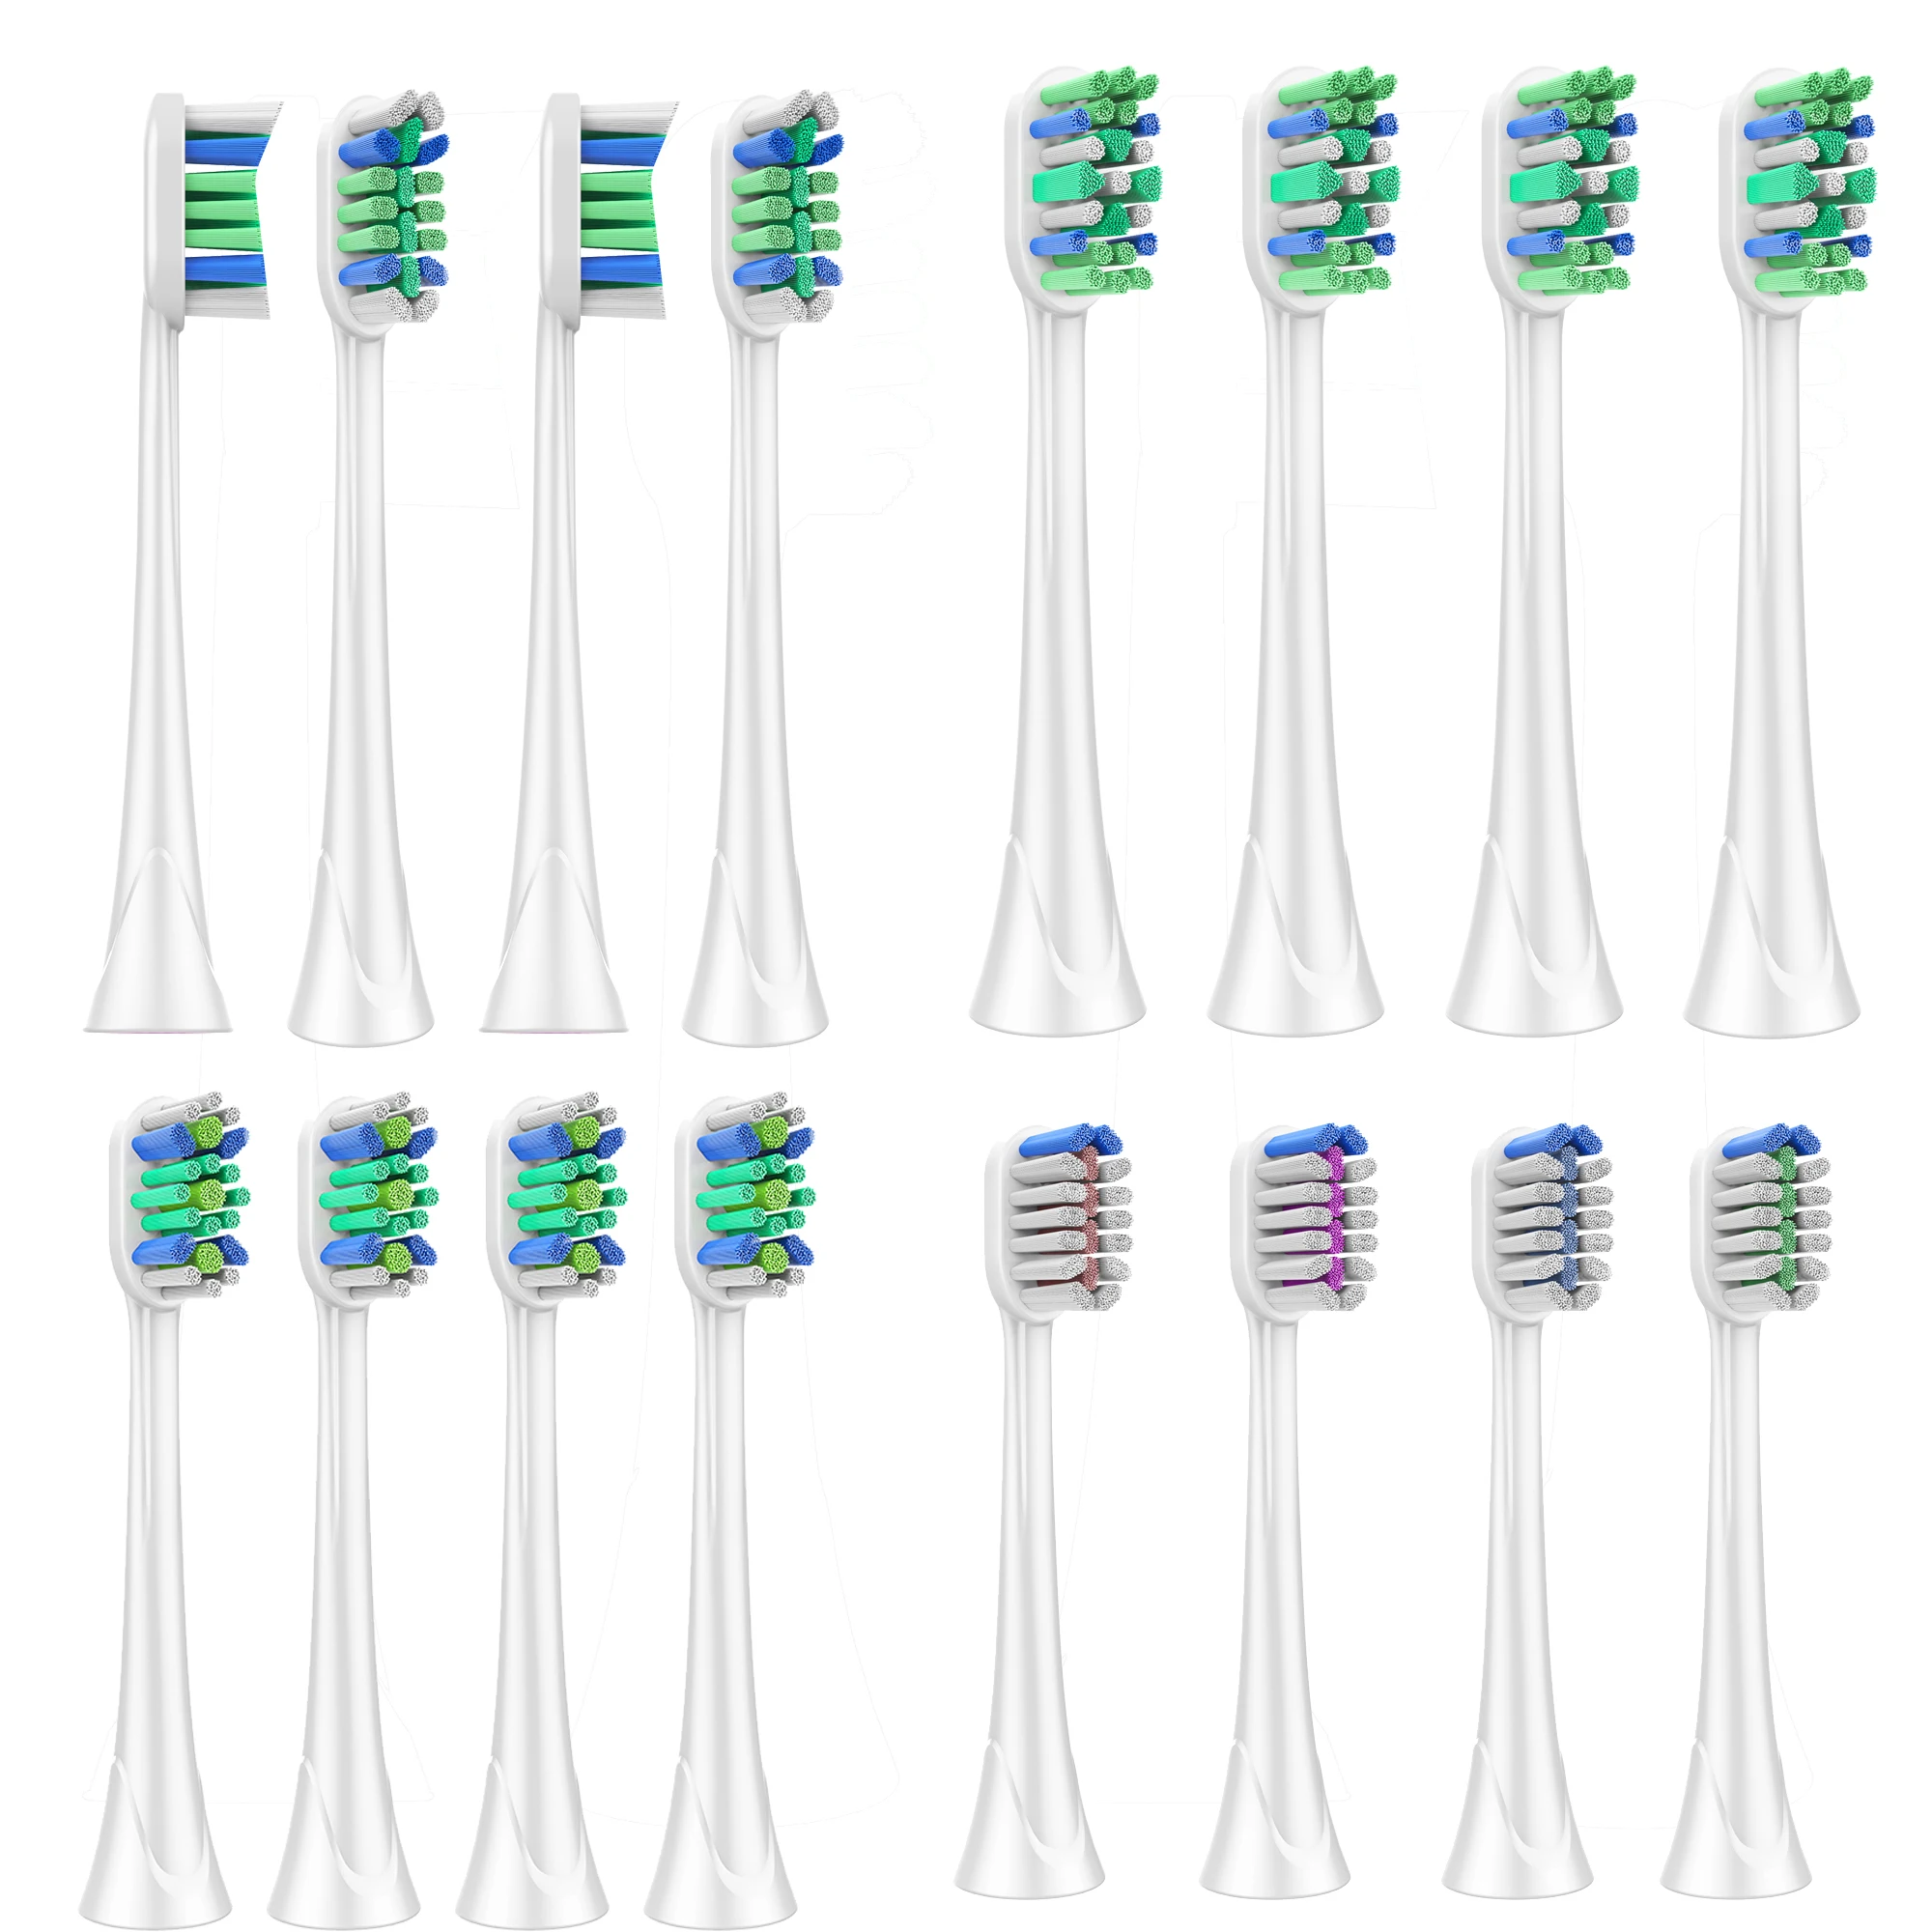 16Pcs Replacement Toothbrush Heads Compatible with Phillips Sonicare, hx6014 DiamondClean, HealthyWhite, FlexCare